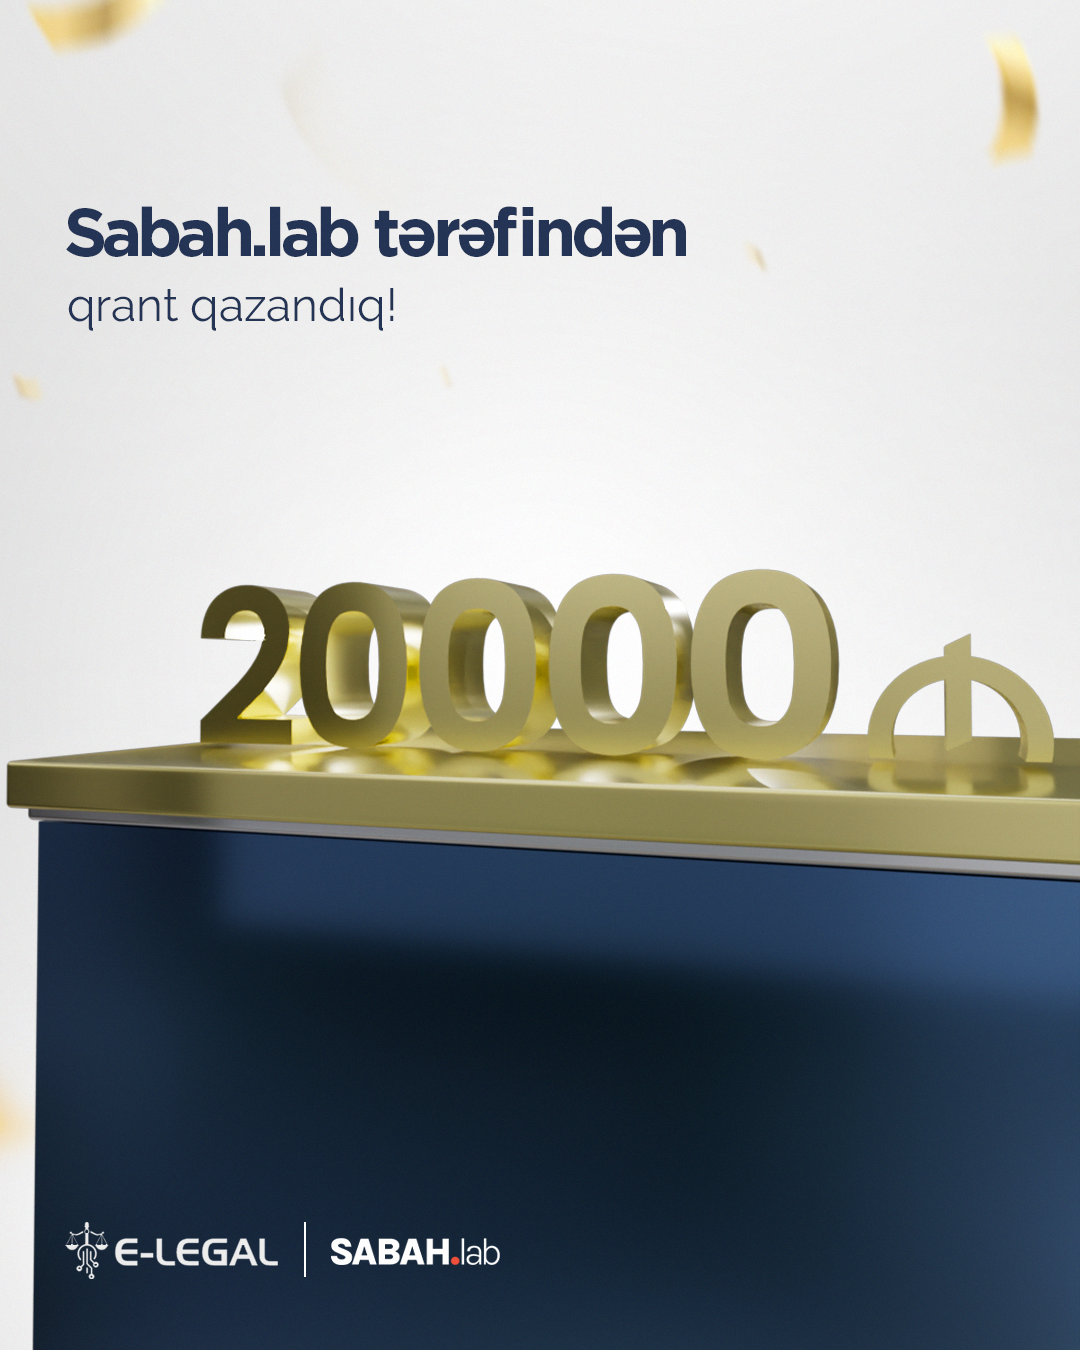 E-LEGAL won an investment of AZN 20,000 by SABAH.lab!